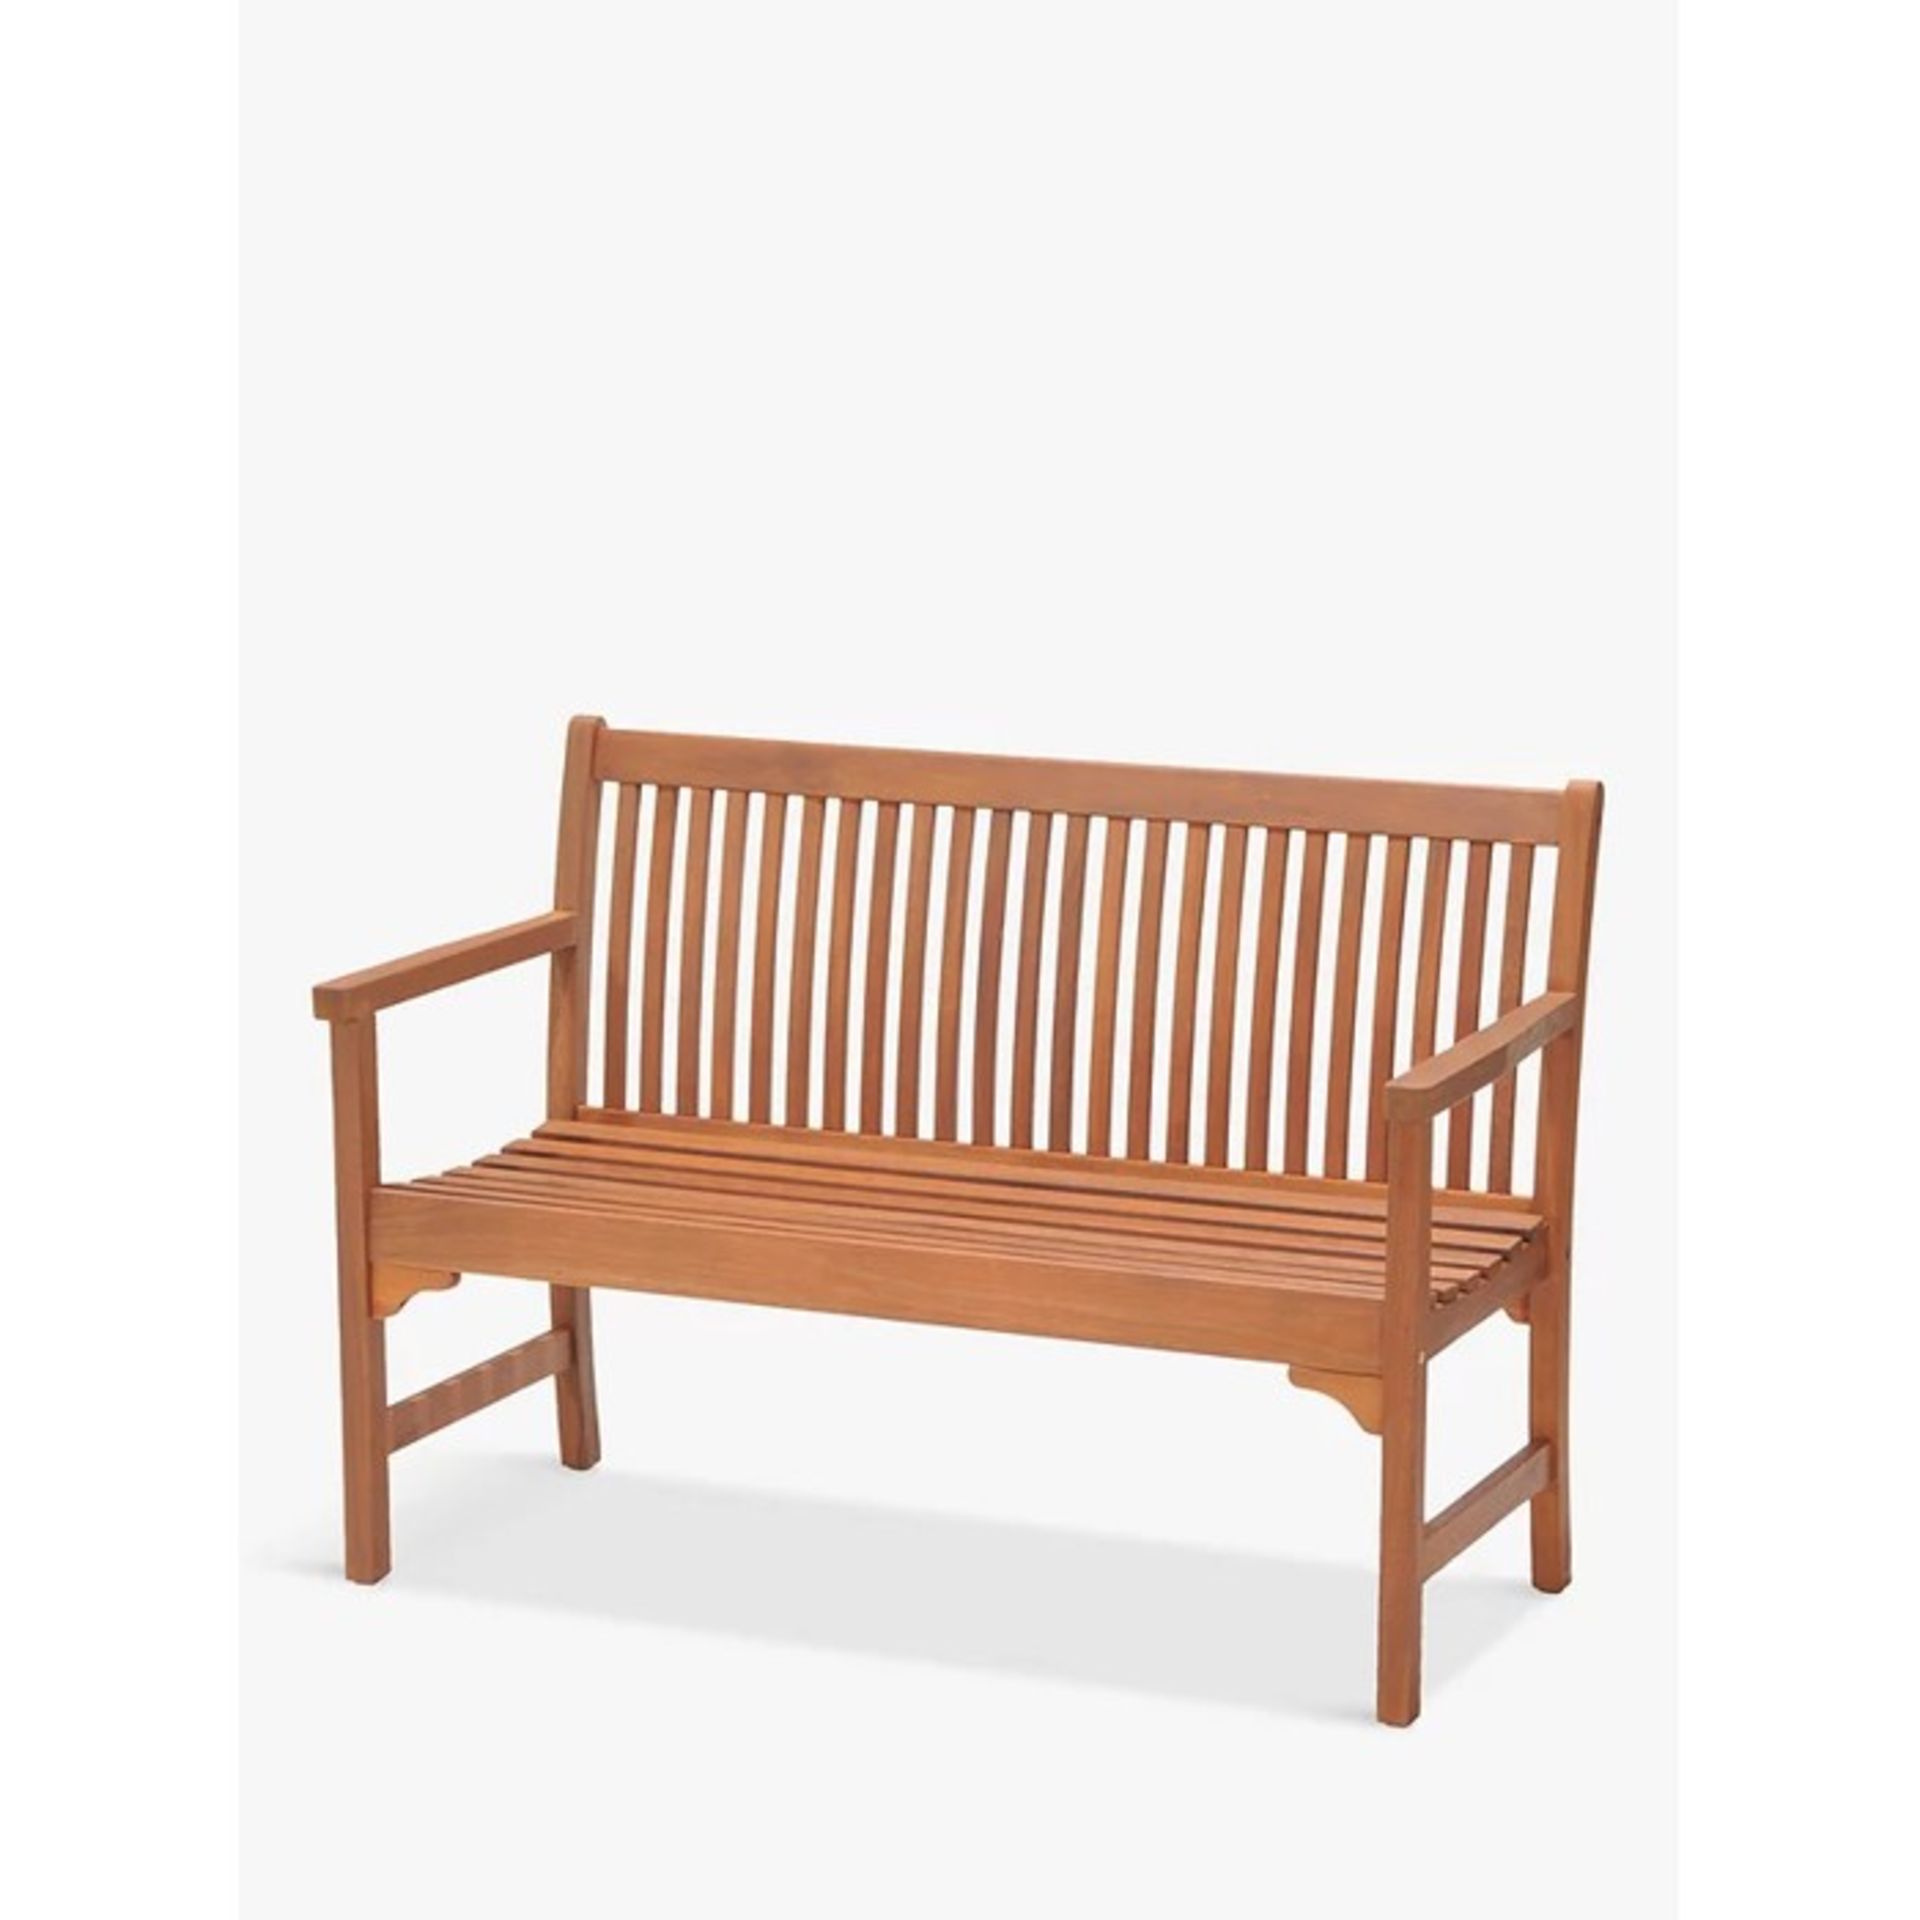 PALLET TO CONTAIN 5 X BRAND NEW JOHN LEWIS 2-Seater Garden Bench, FSC-Certified (Eucalyptus Wood), - Image 2 of 3